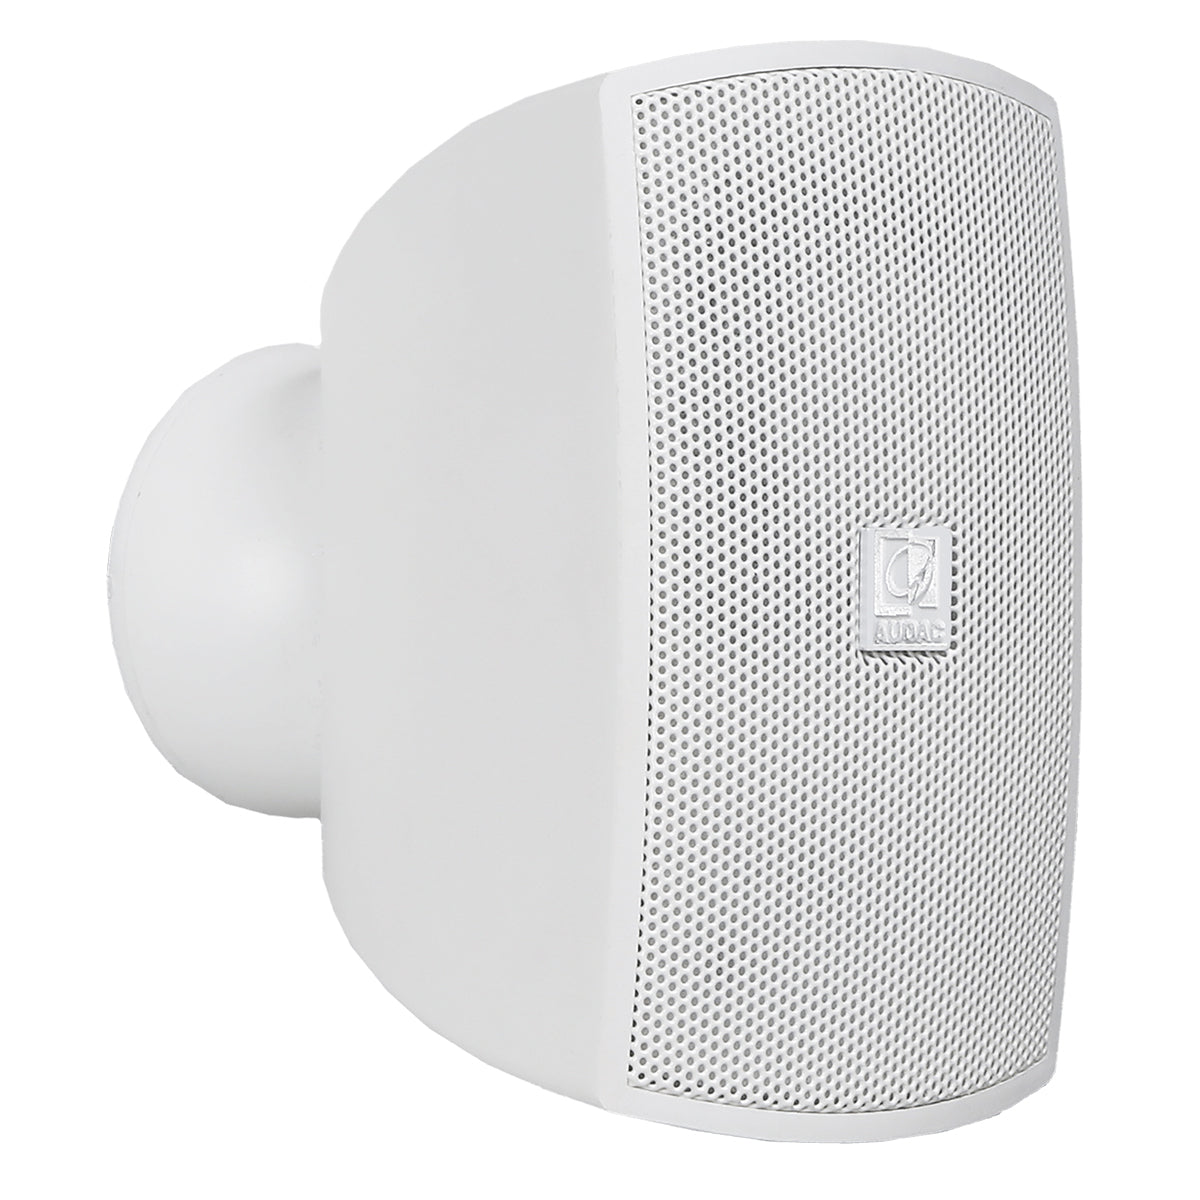 Audac ATEO2 Compact wall speaker with CleverMount 2" White version - 8ohm